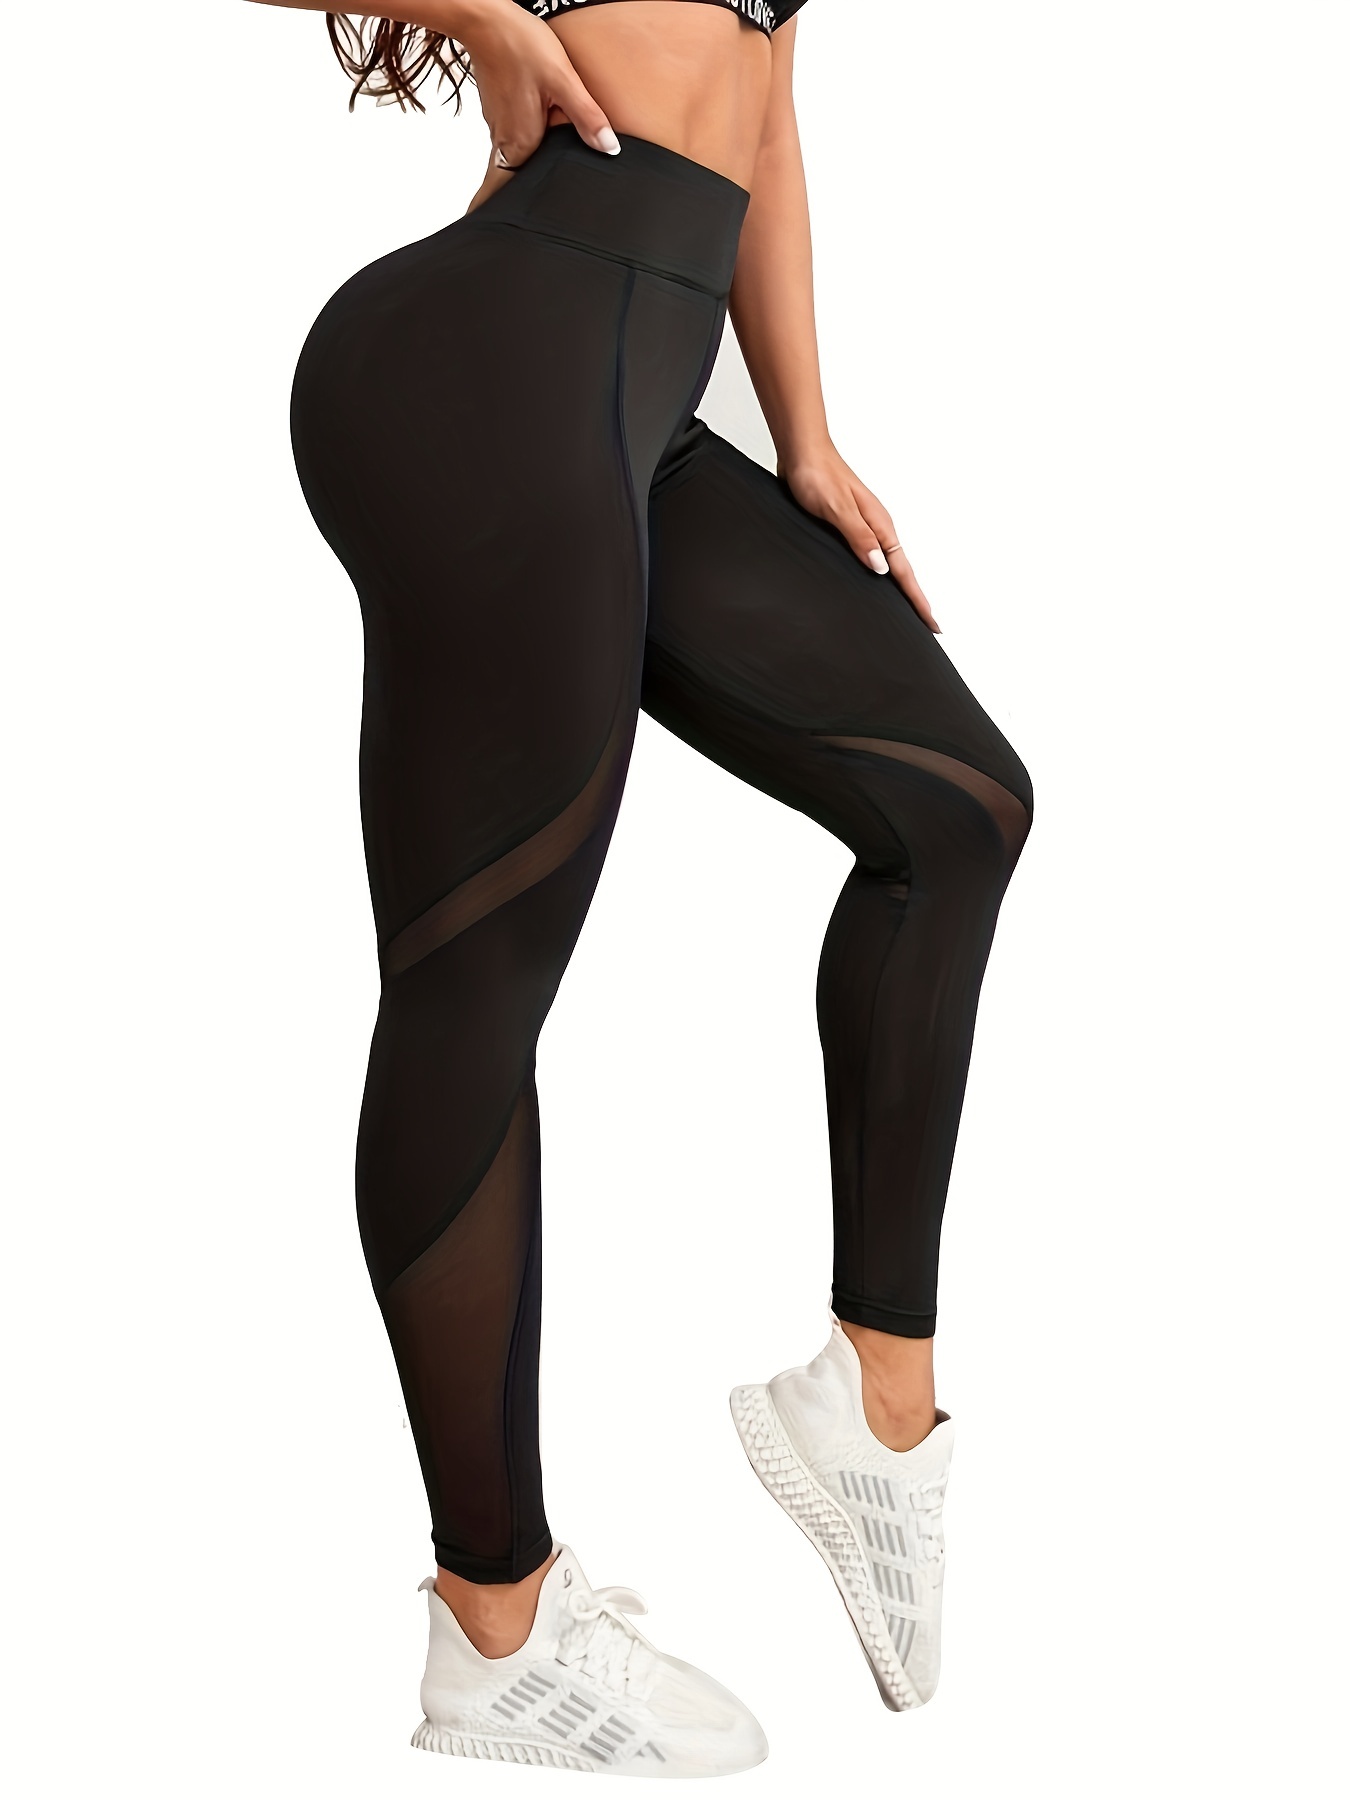 Plus Ruched Mesh Leggings Without Panty  Outfits with leggings, Mesh  leggings outfit, Mesh leggings